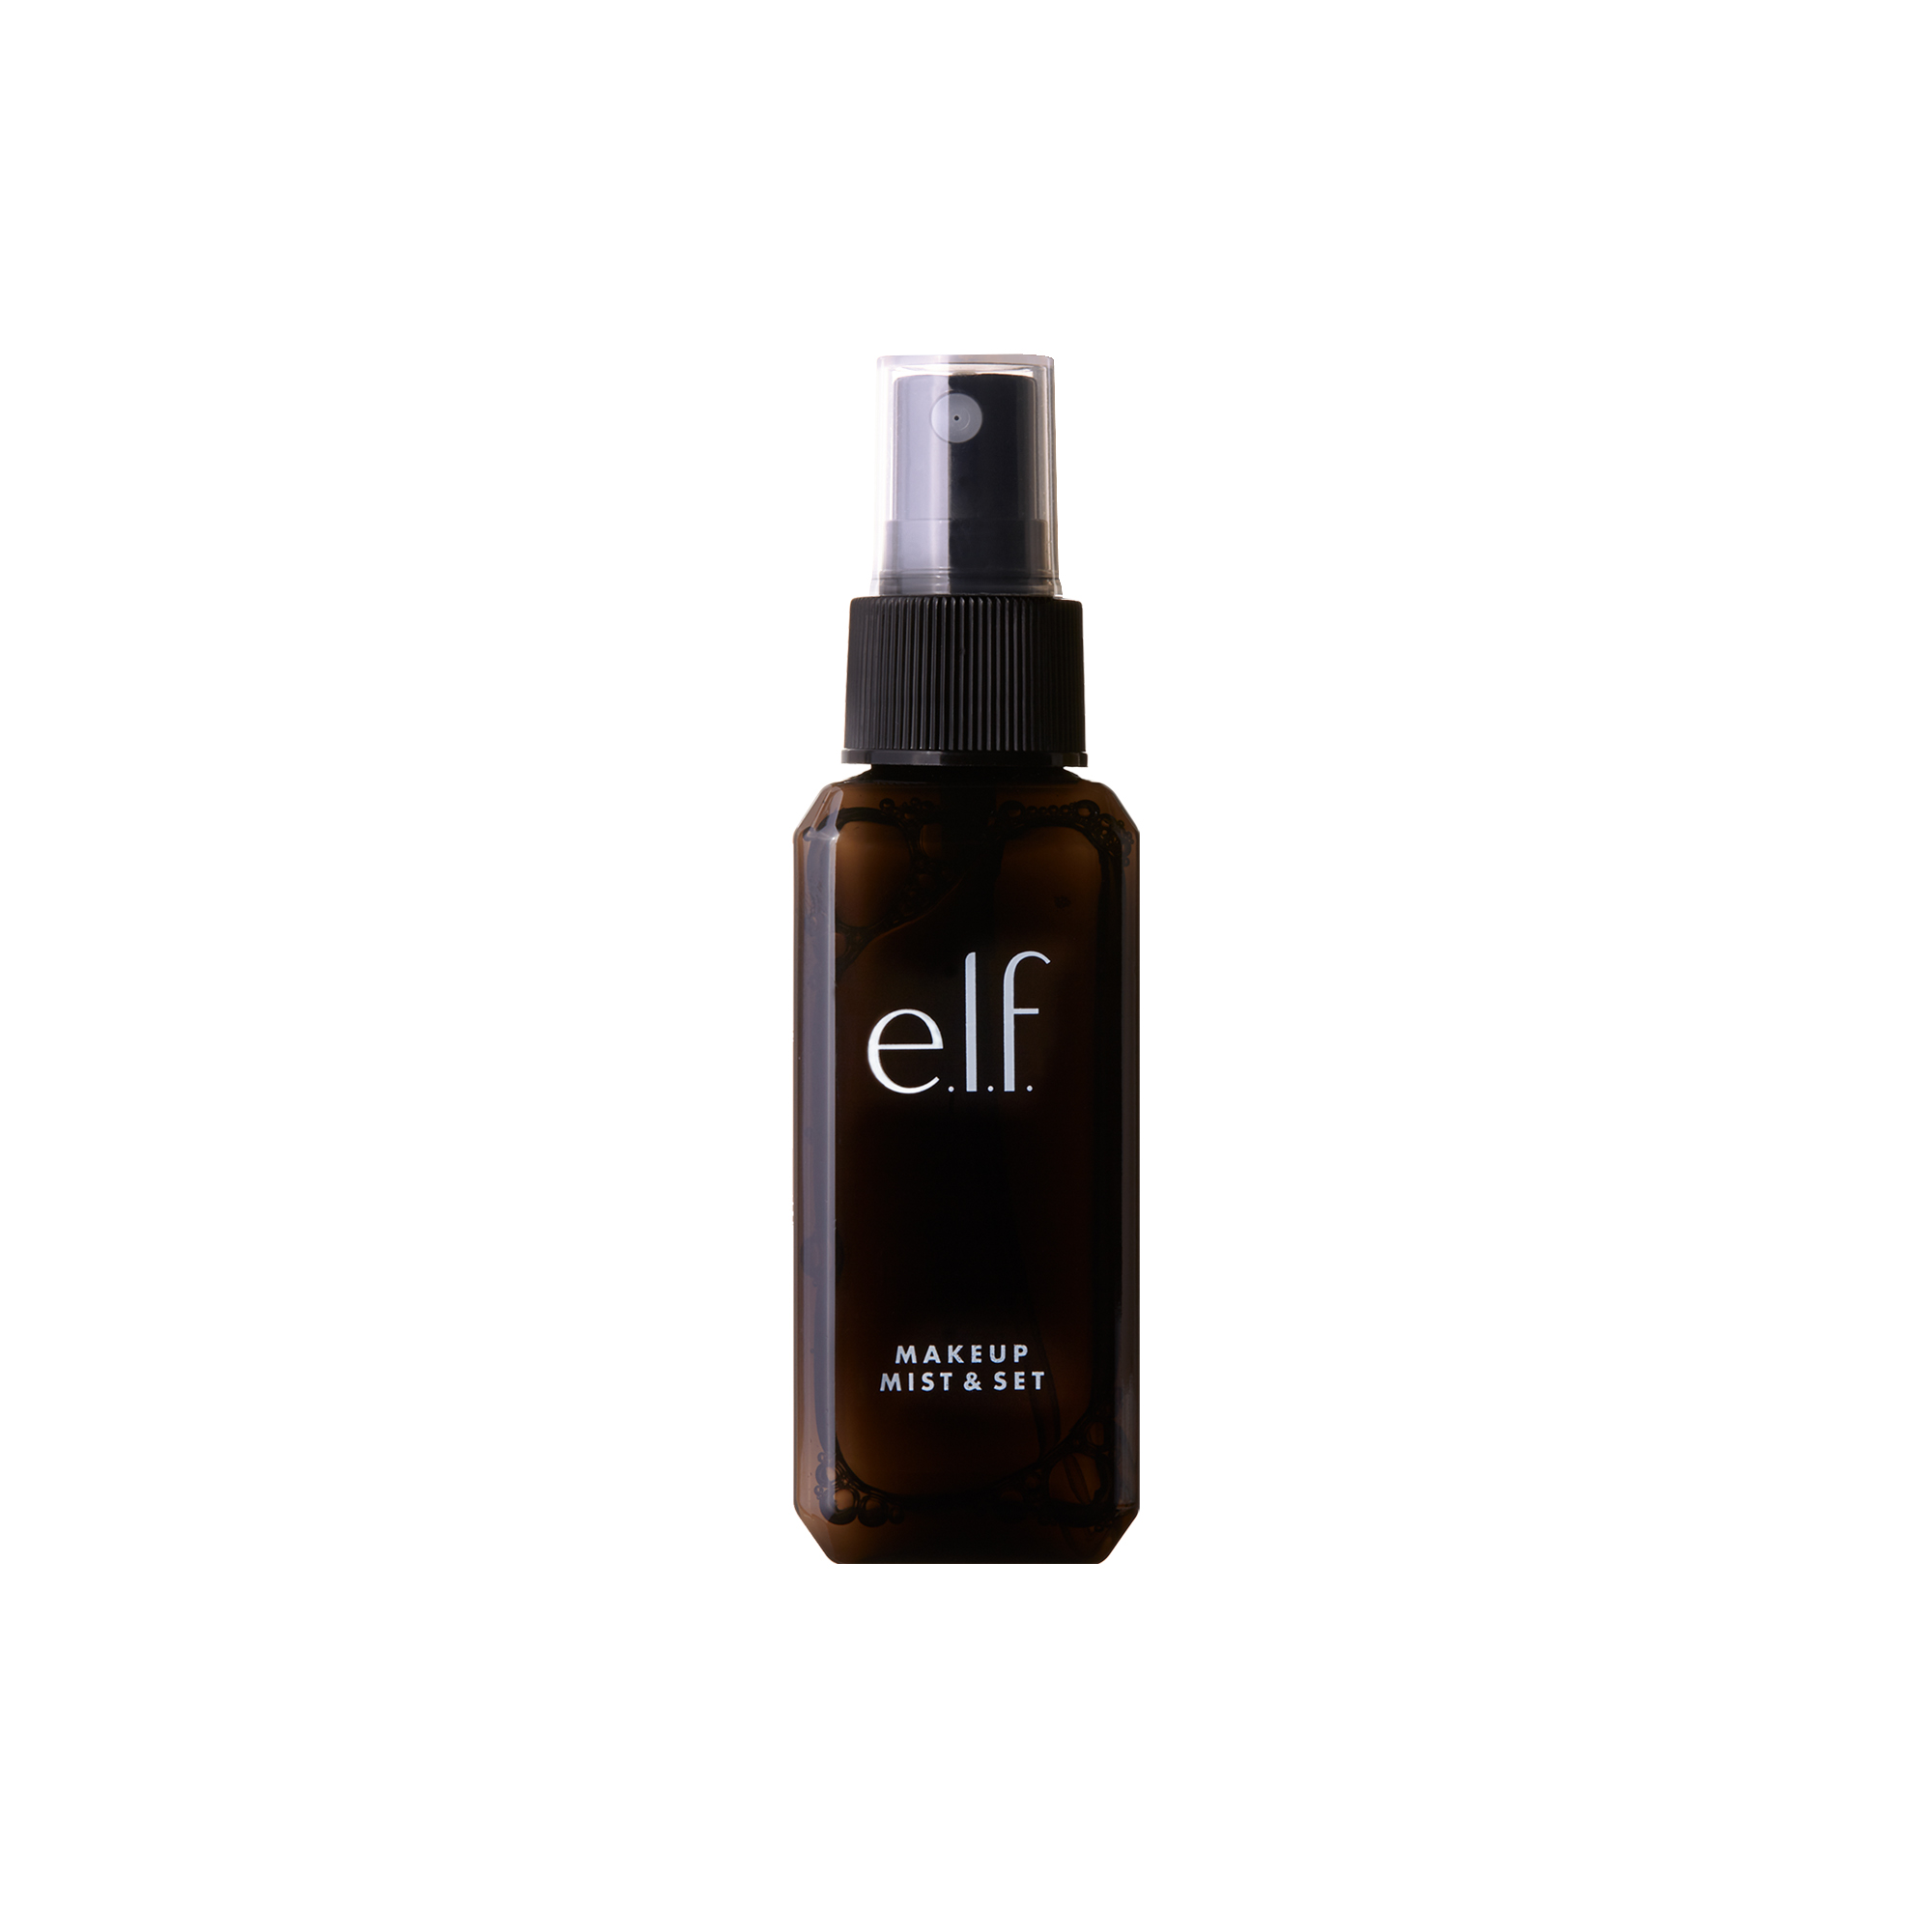 Makeup Mist and Set - Clear by e.l.f. for Women - 2.02 oz Mist - image 2 of 4